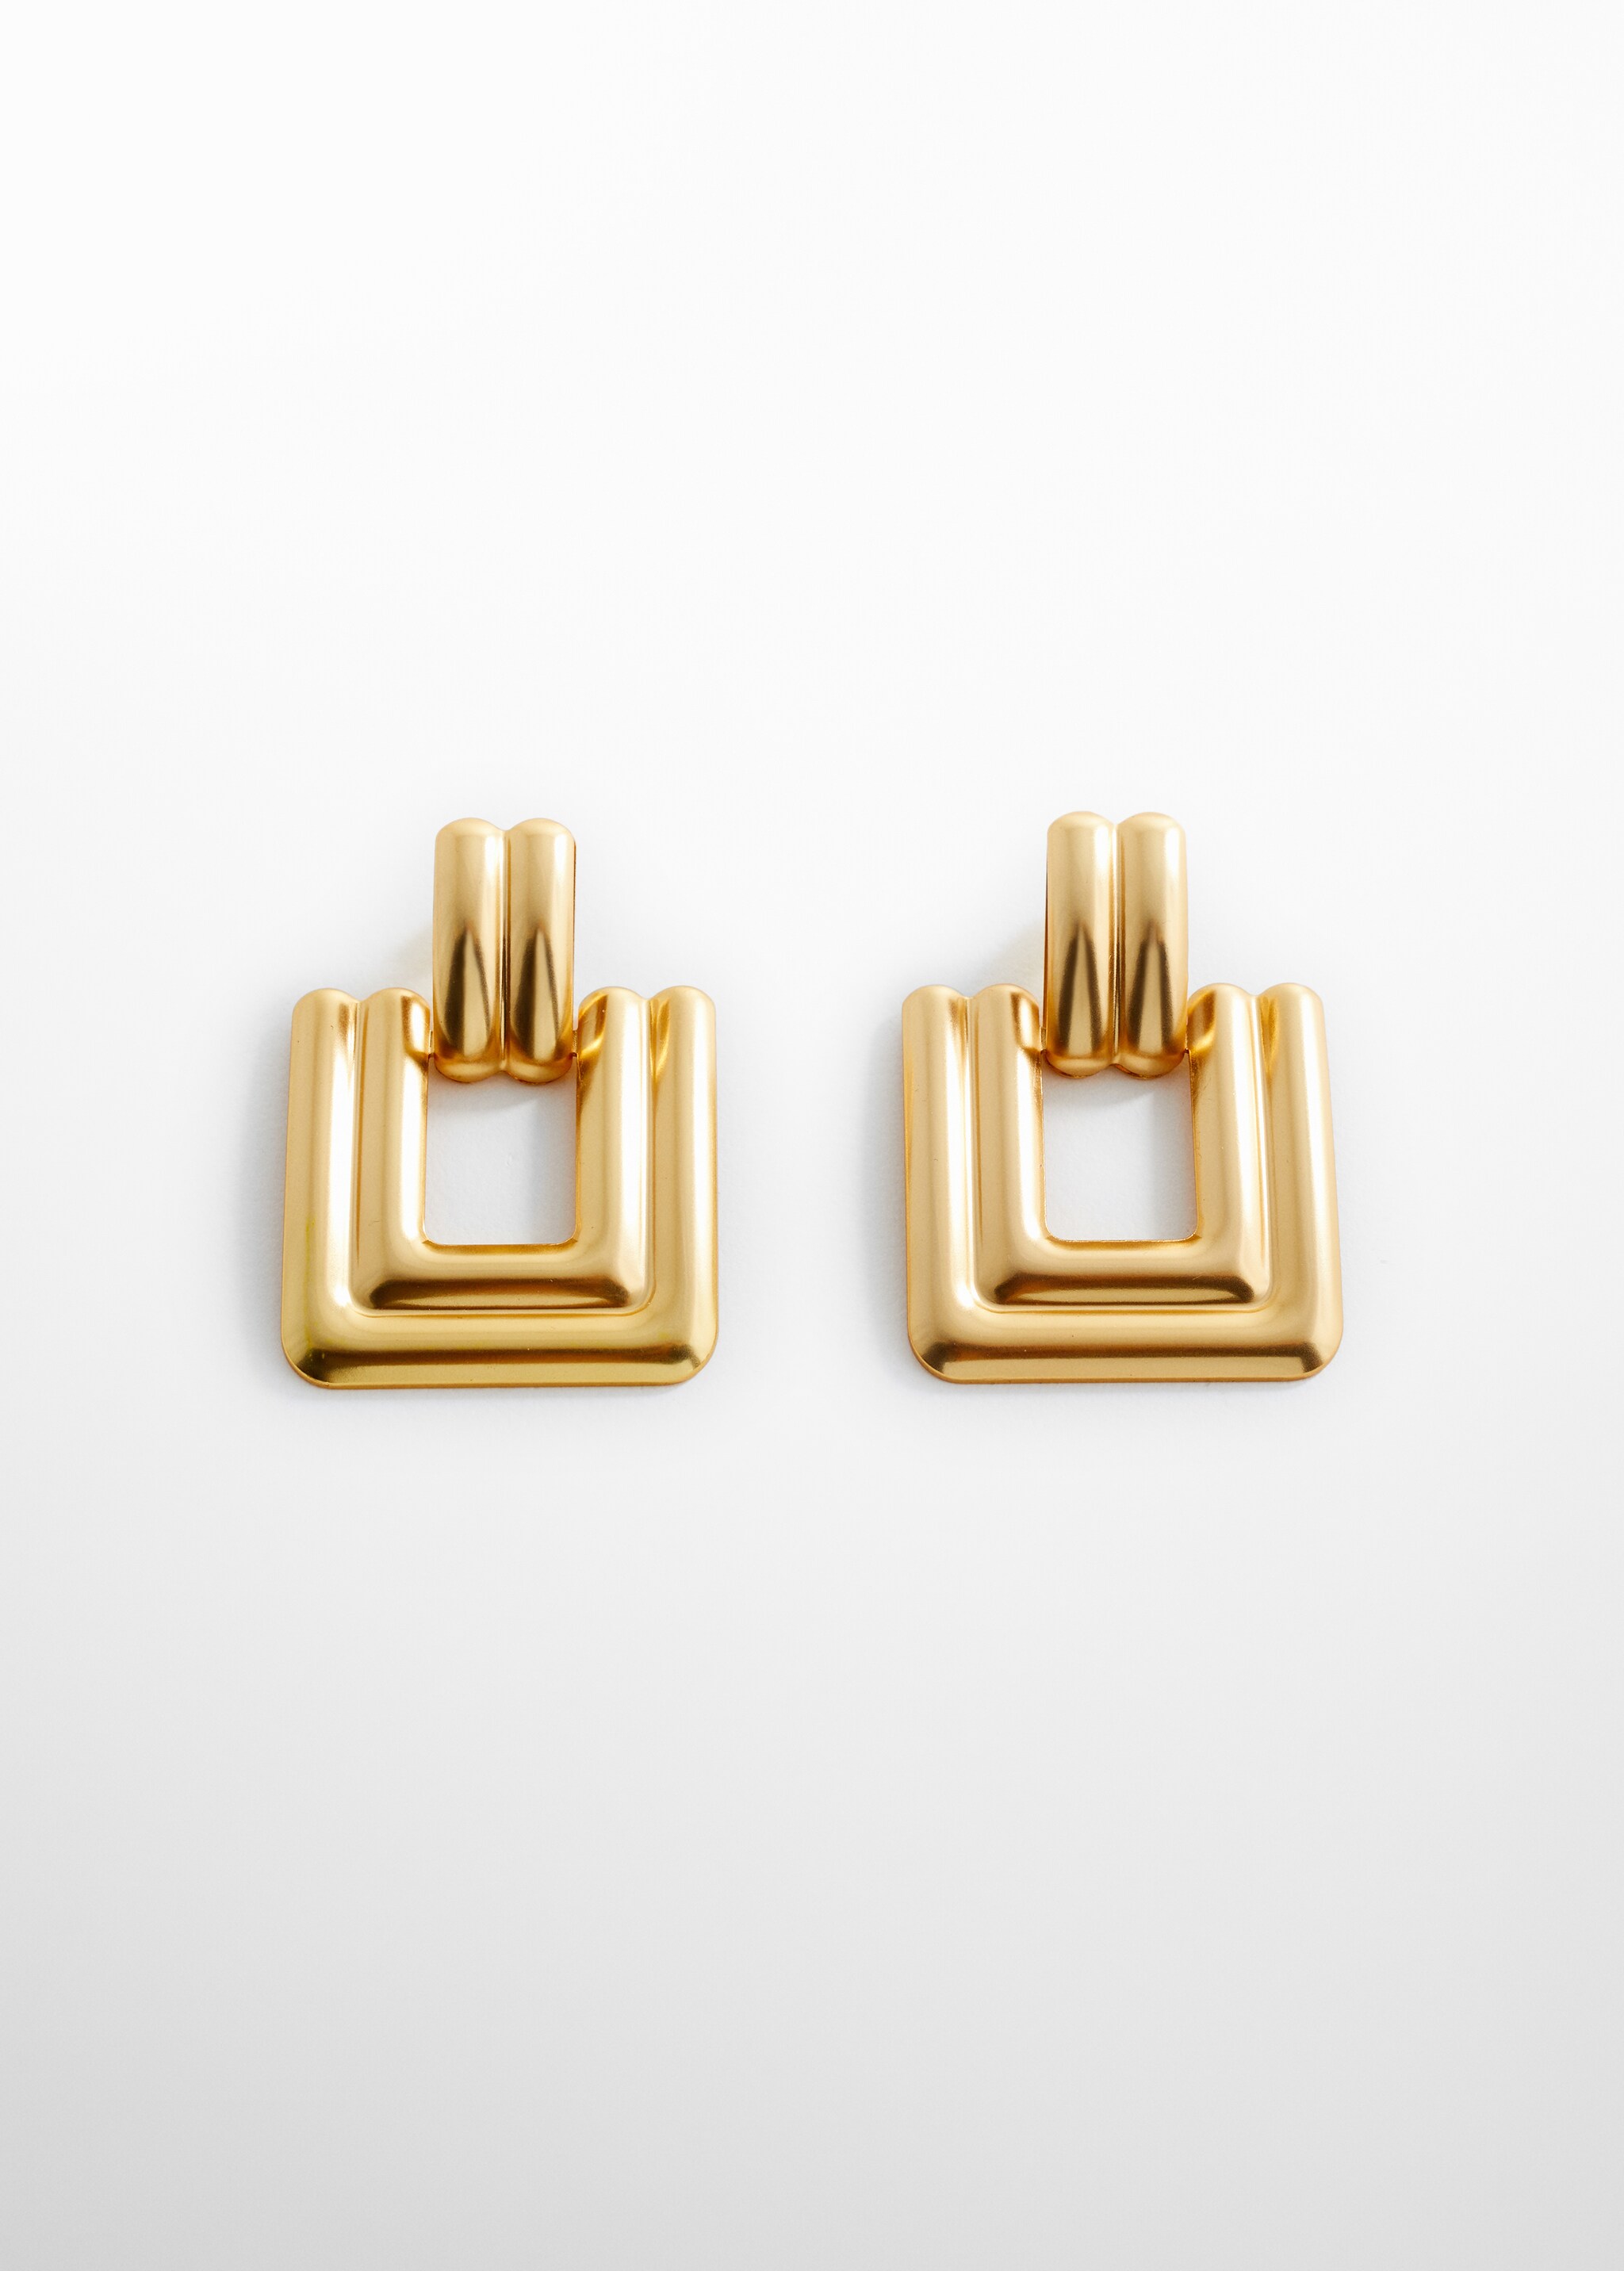 Square earrings - Article without model